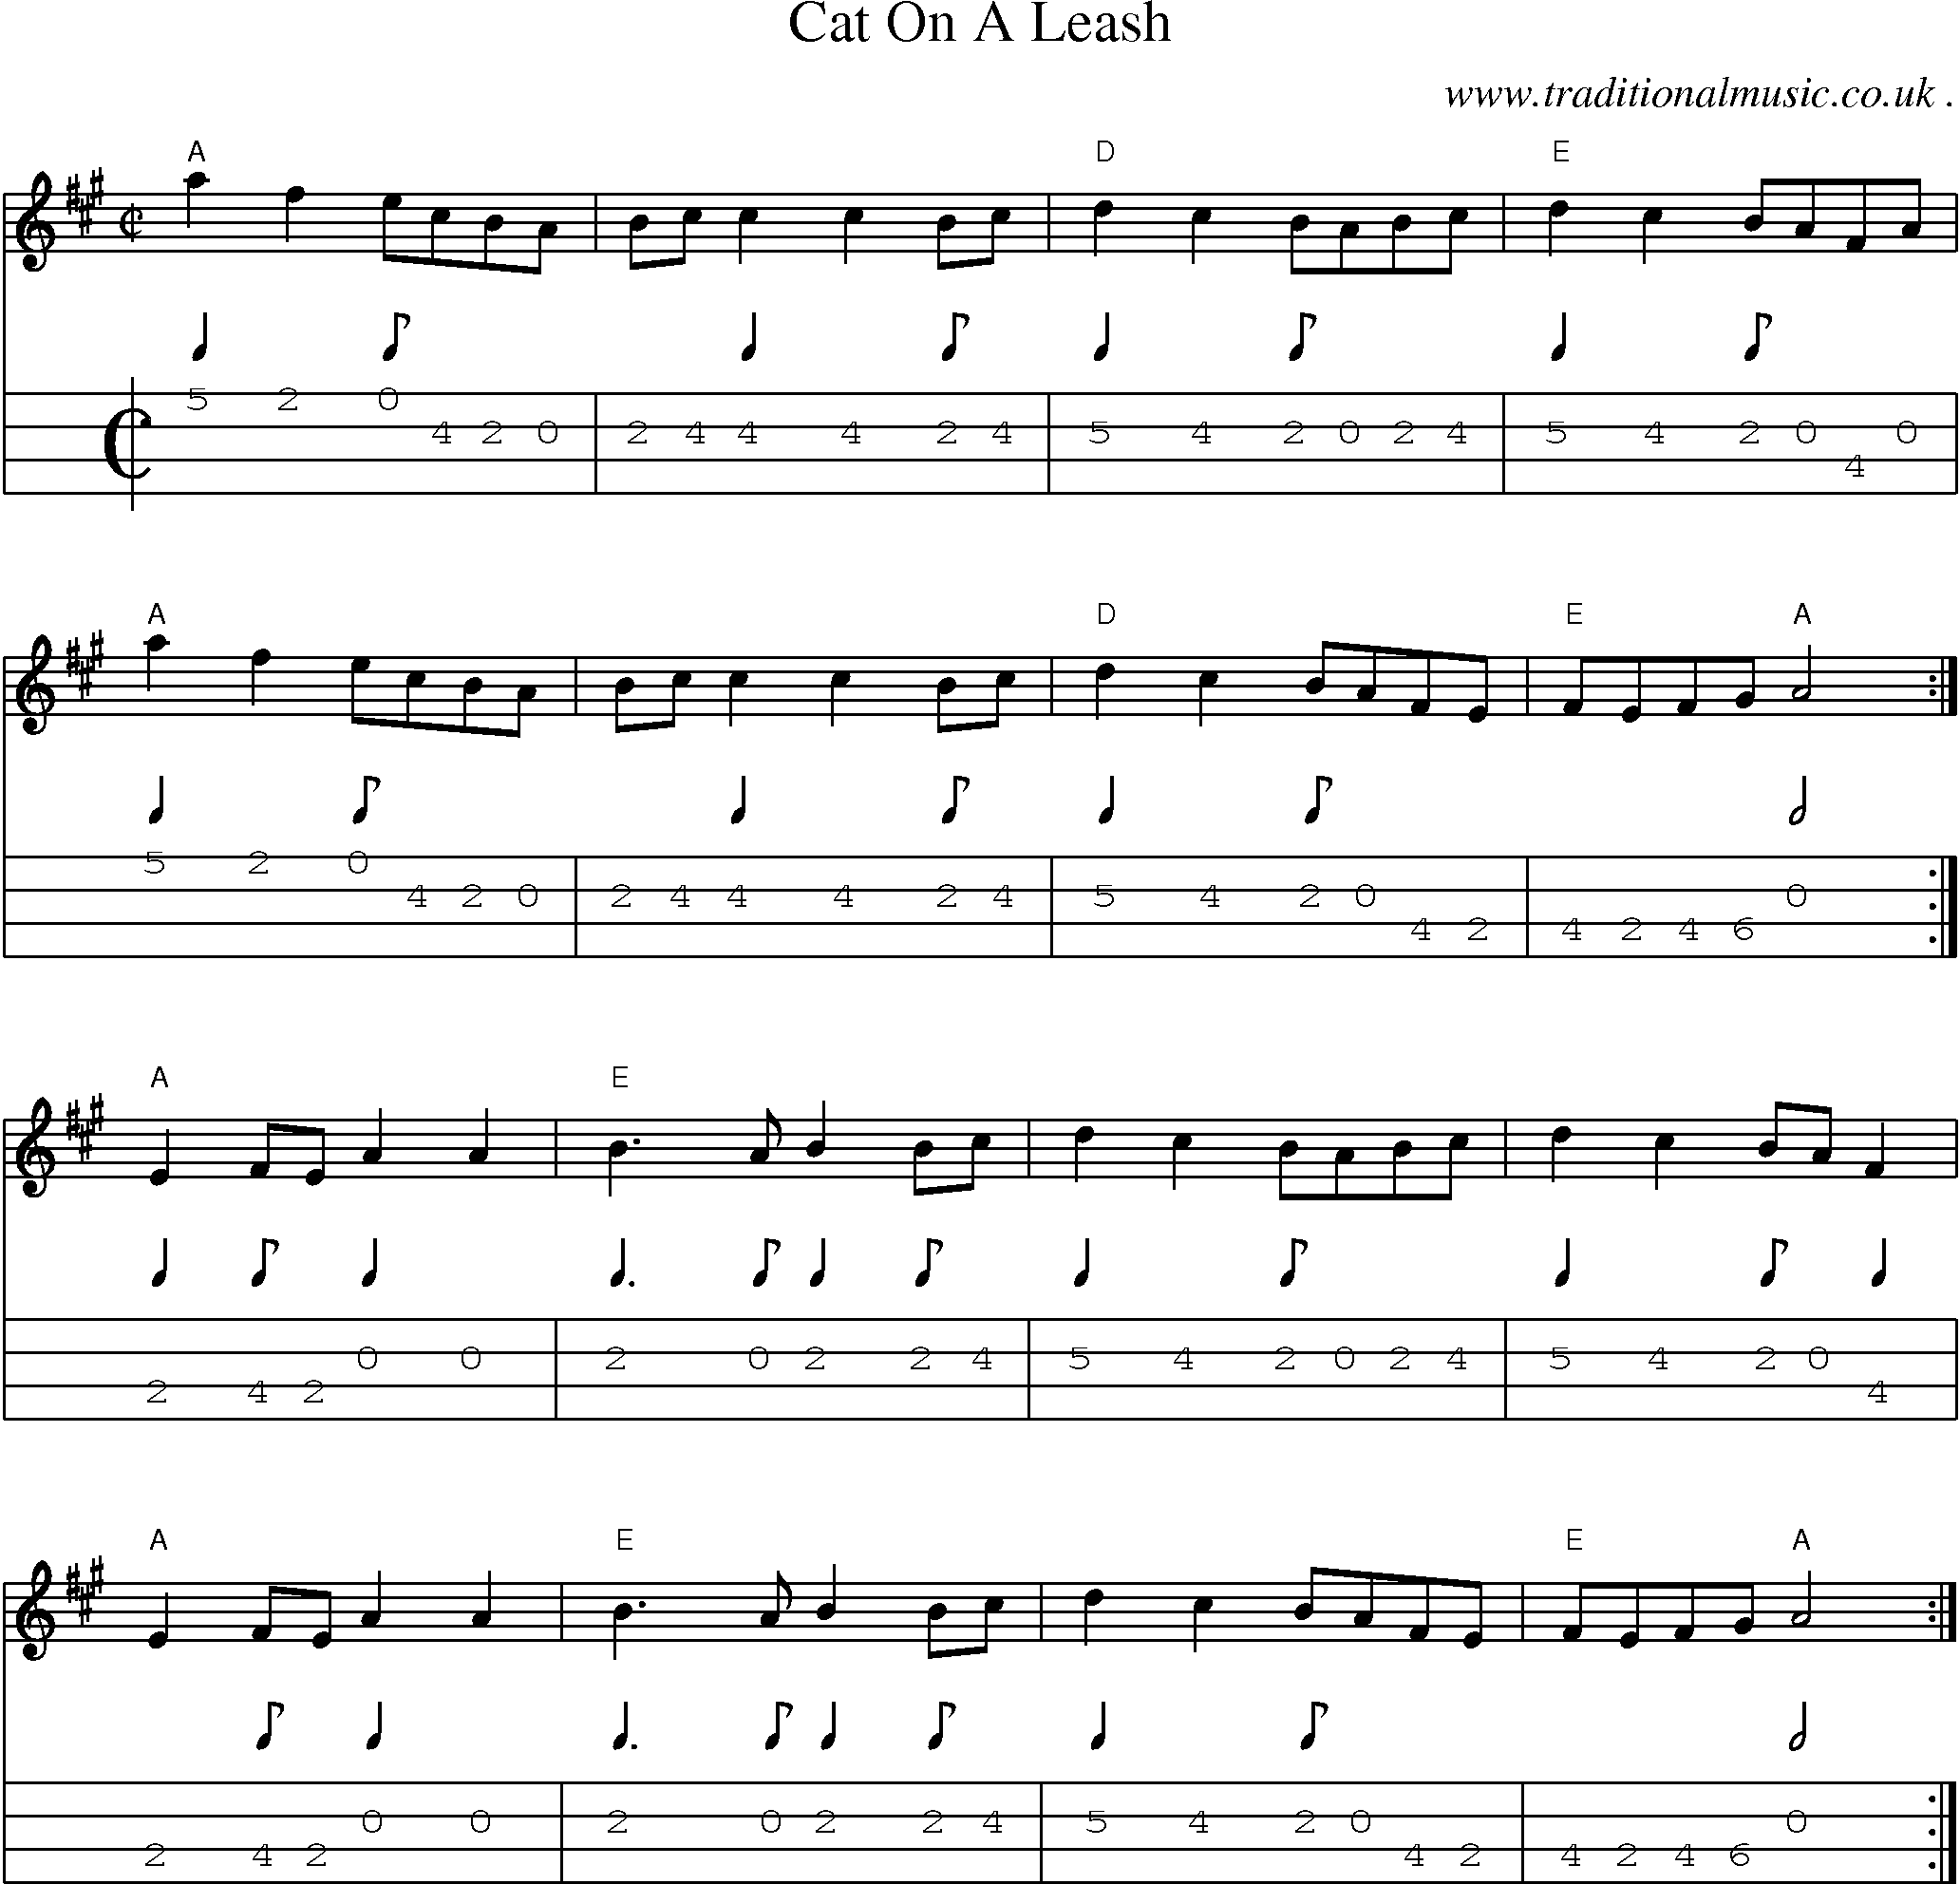 Music Score and Guitar Tabs for Cat On A Leash